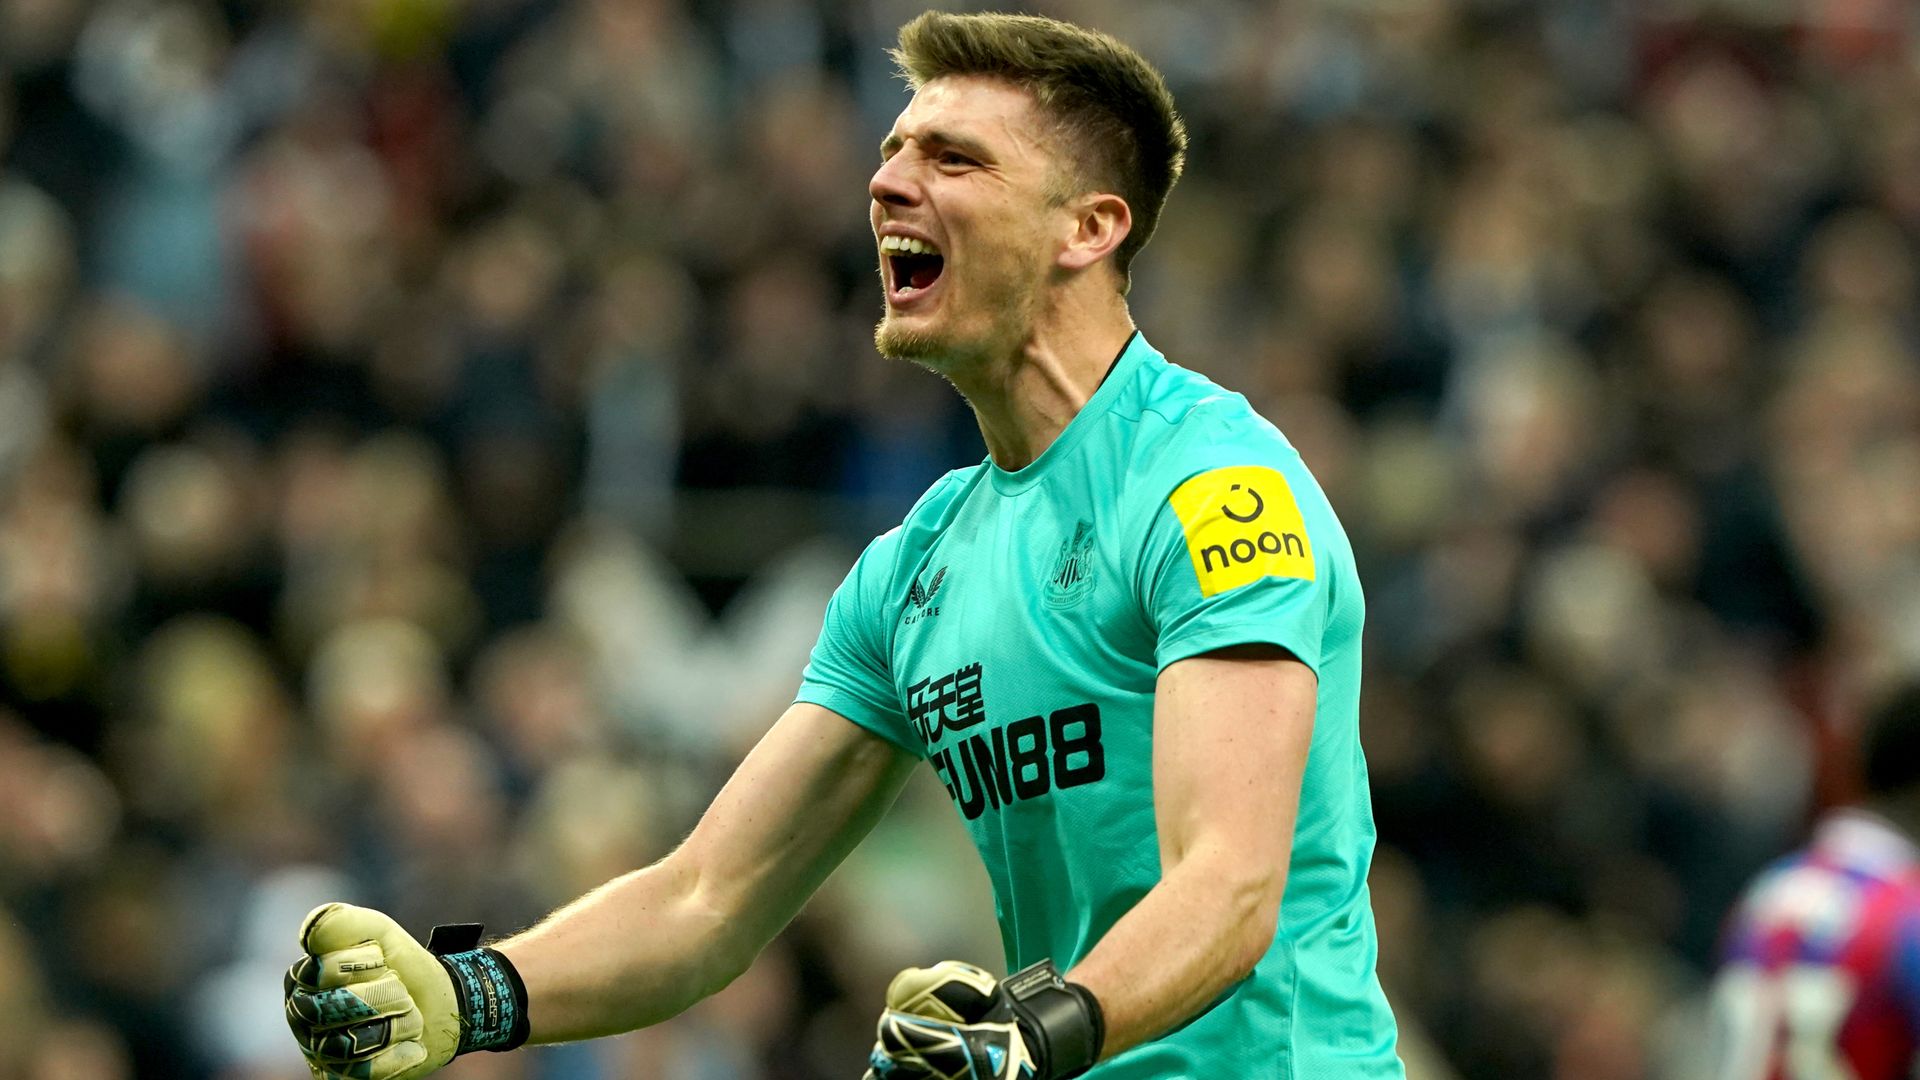 Pope shows England shootout credentials to edge Newcastle past Palace